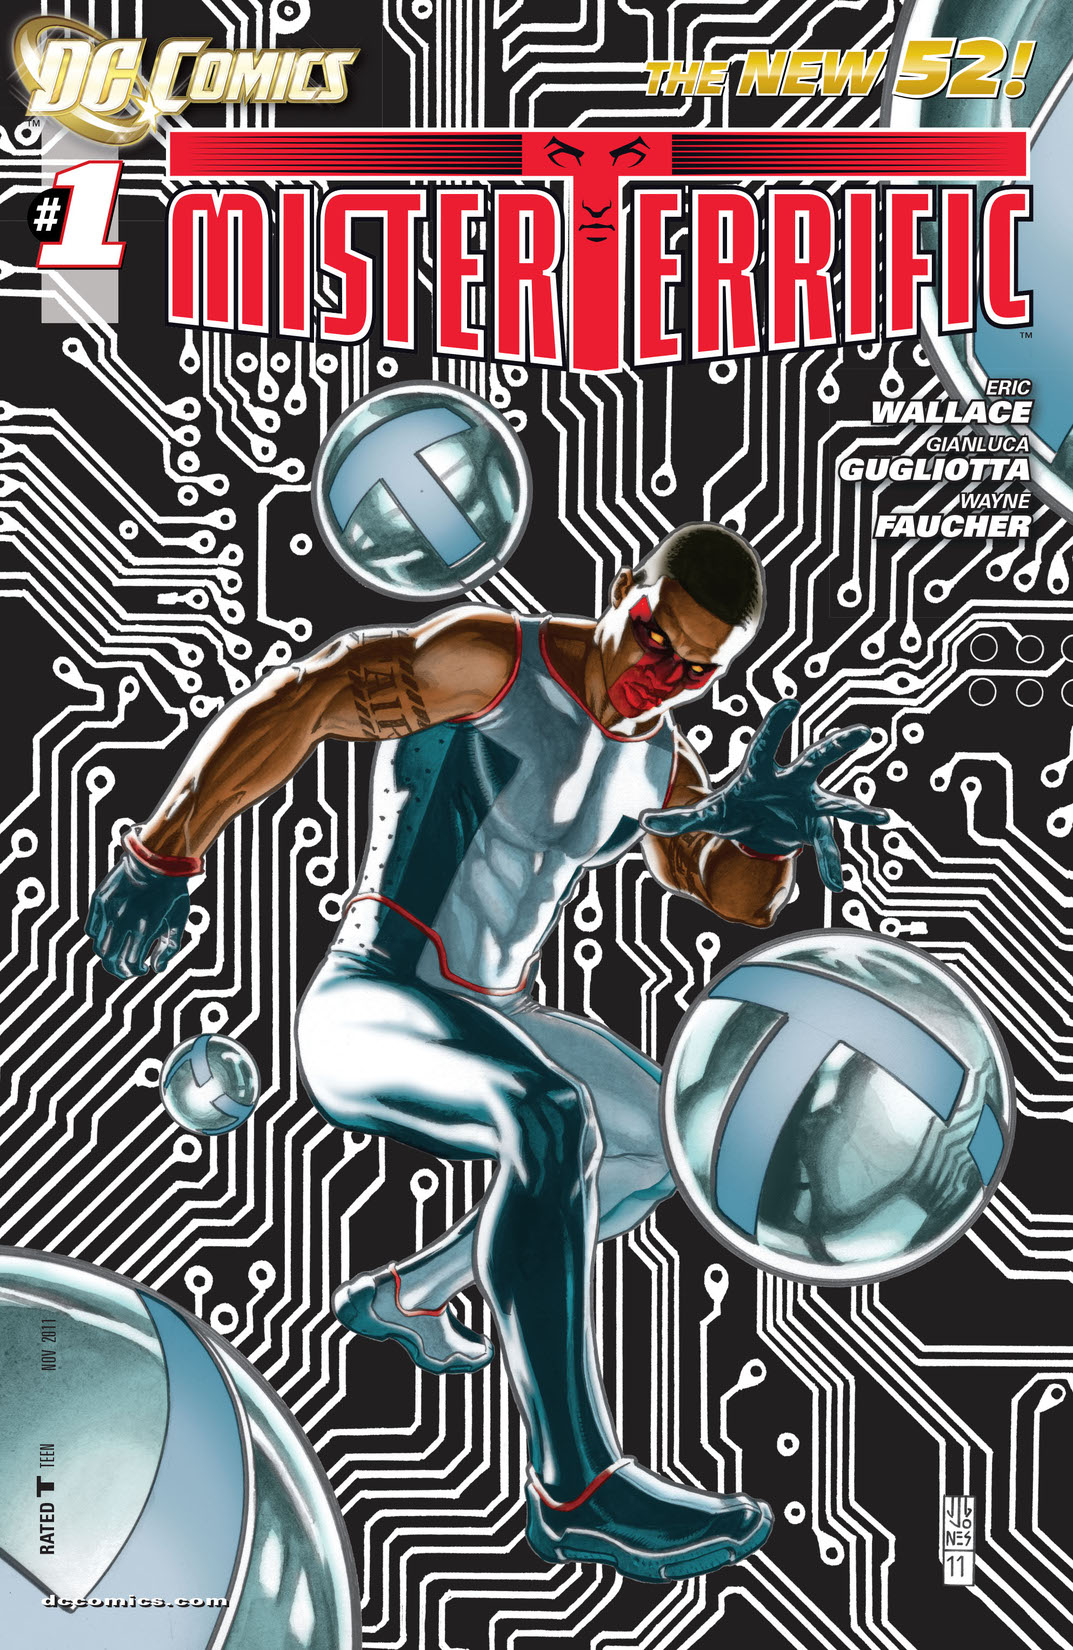 Mister Terrific #1 preview images